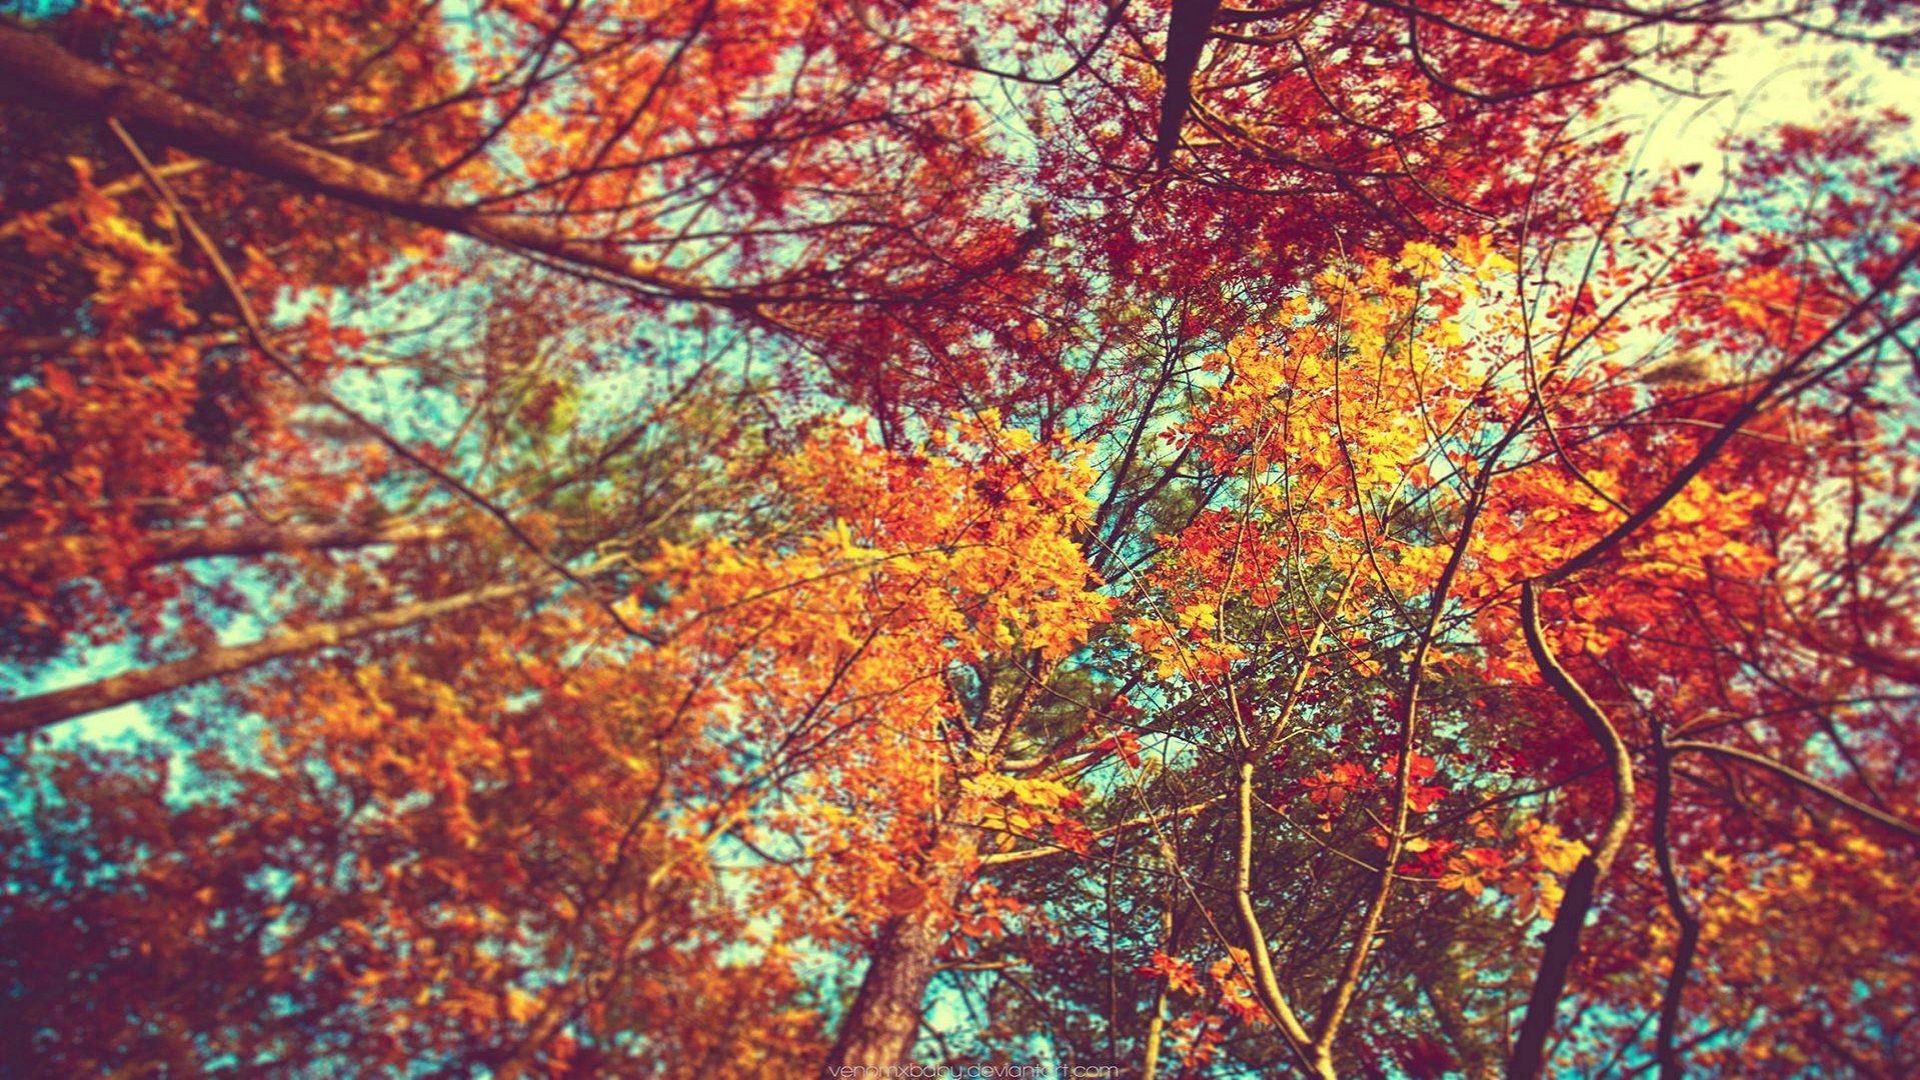 General 1920x1080 trees leaves colorful branch fall plants nature worm's eye view